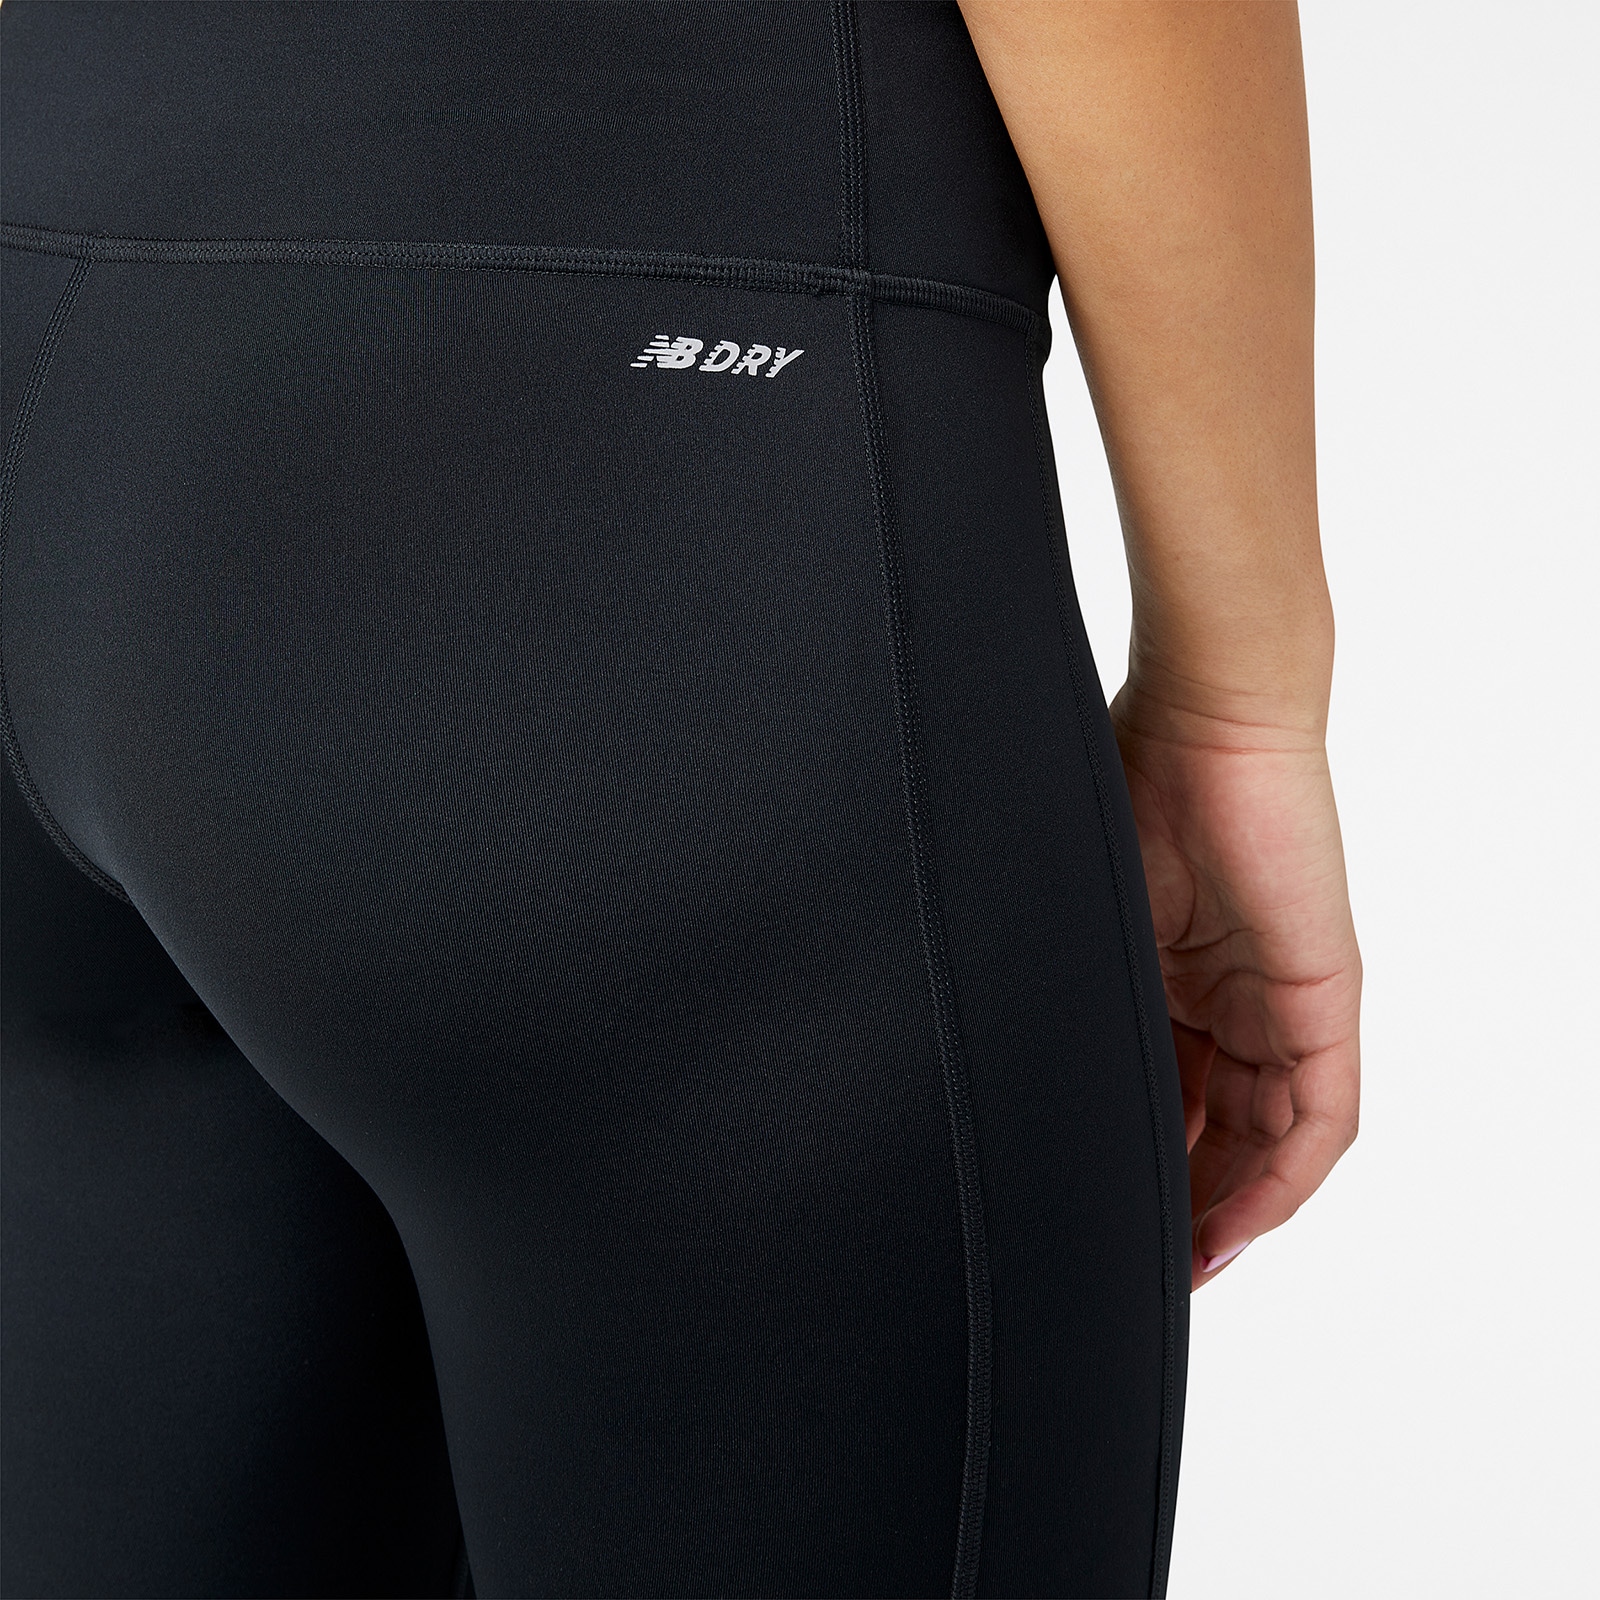 Accelerate tights